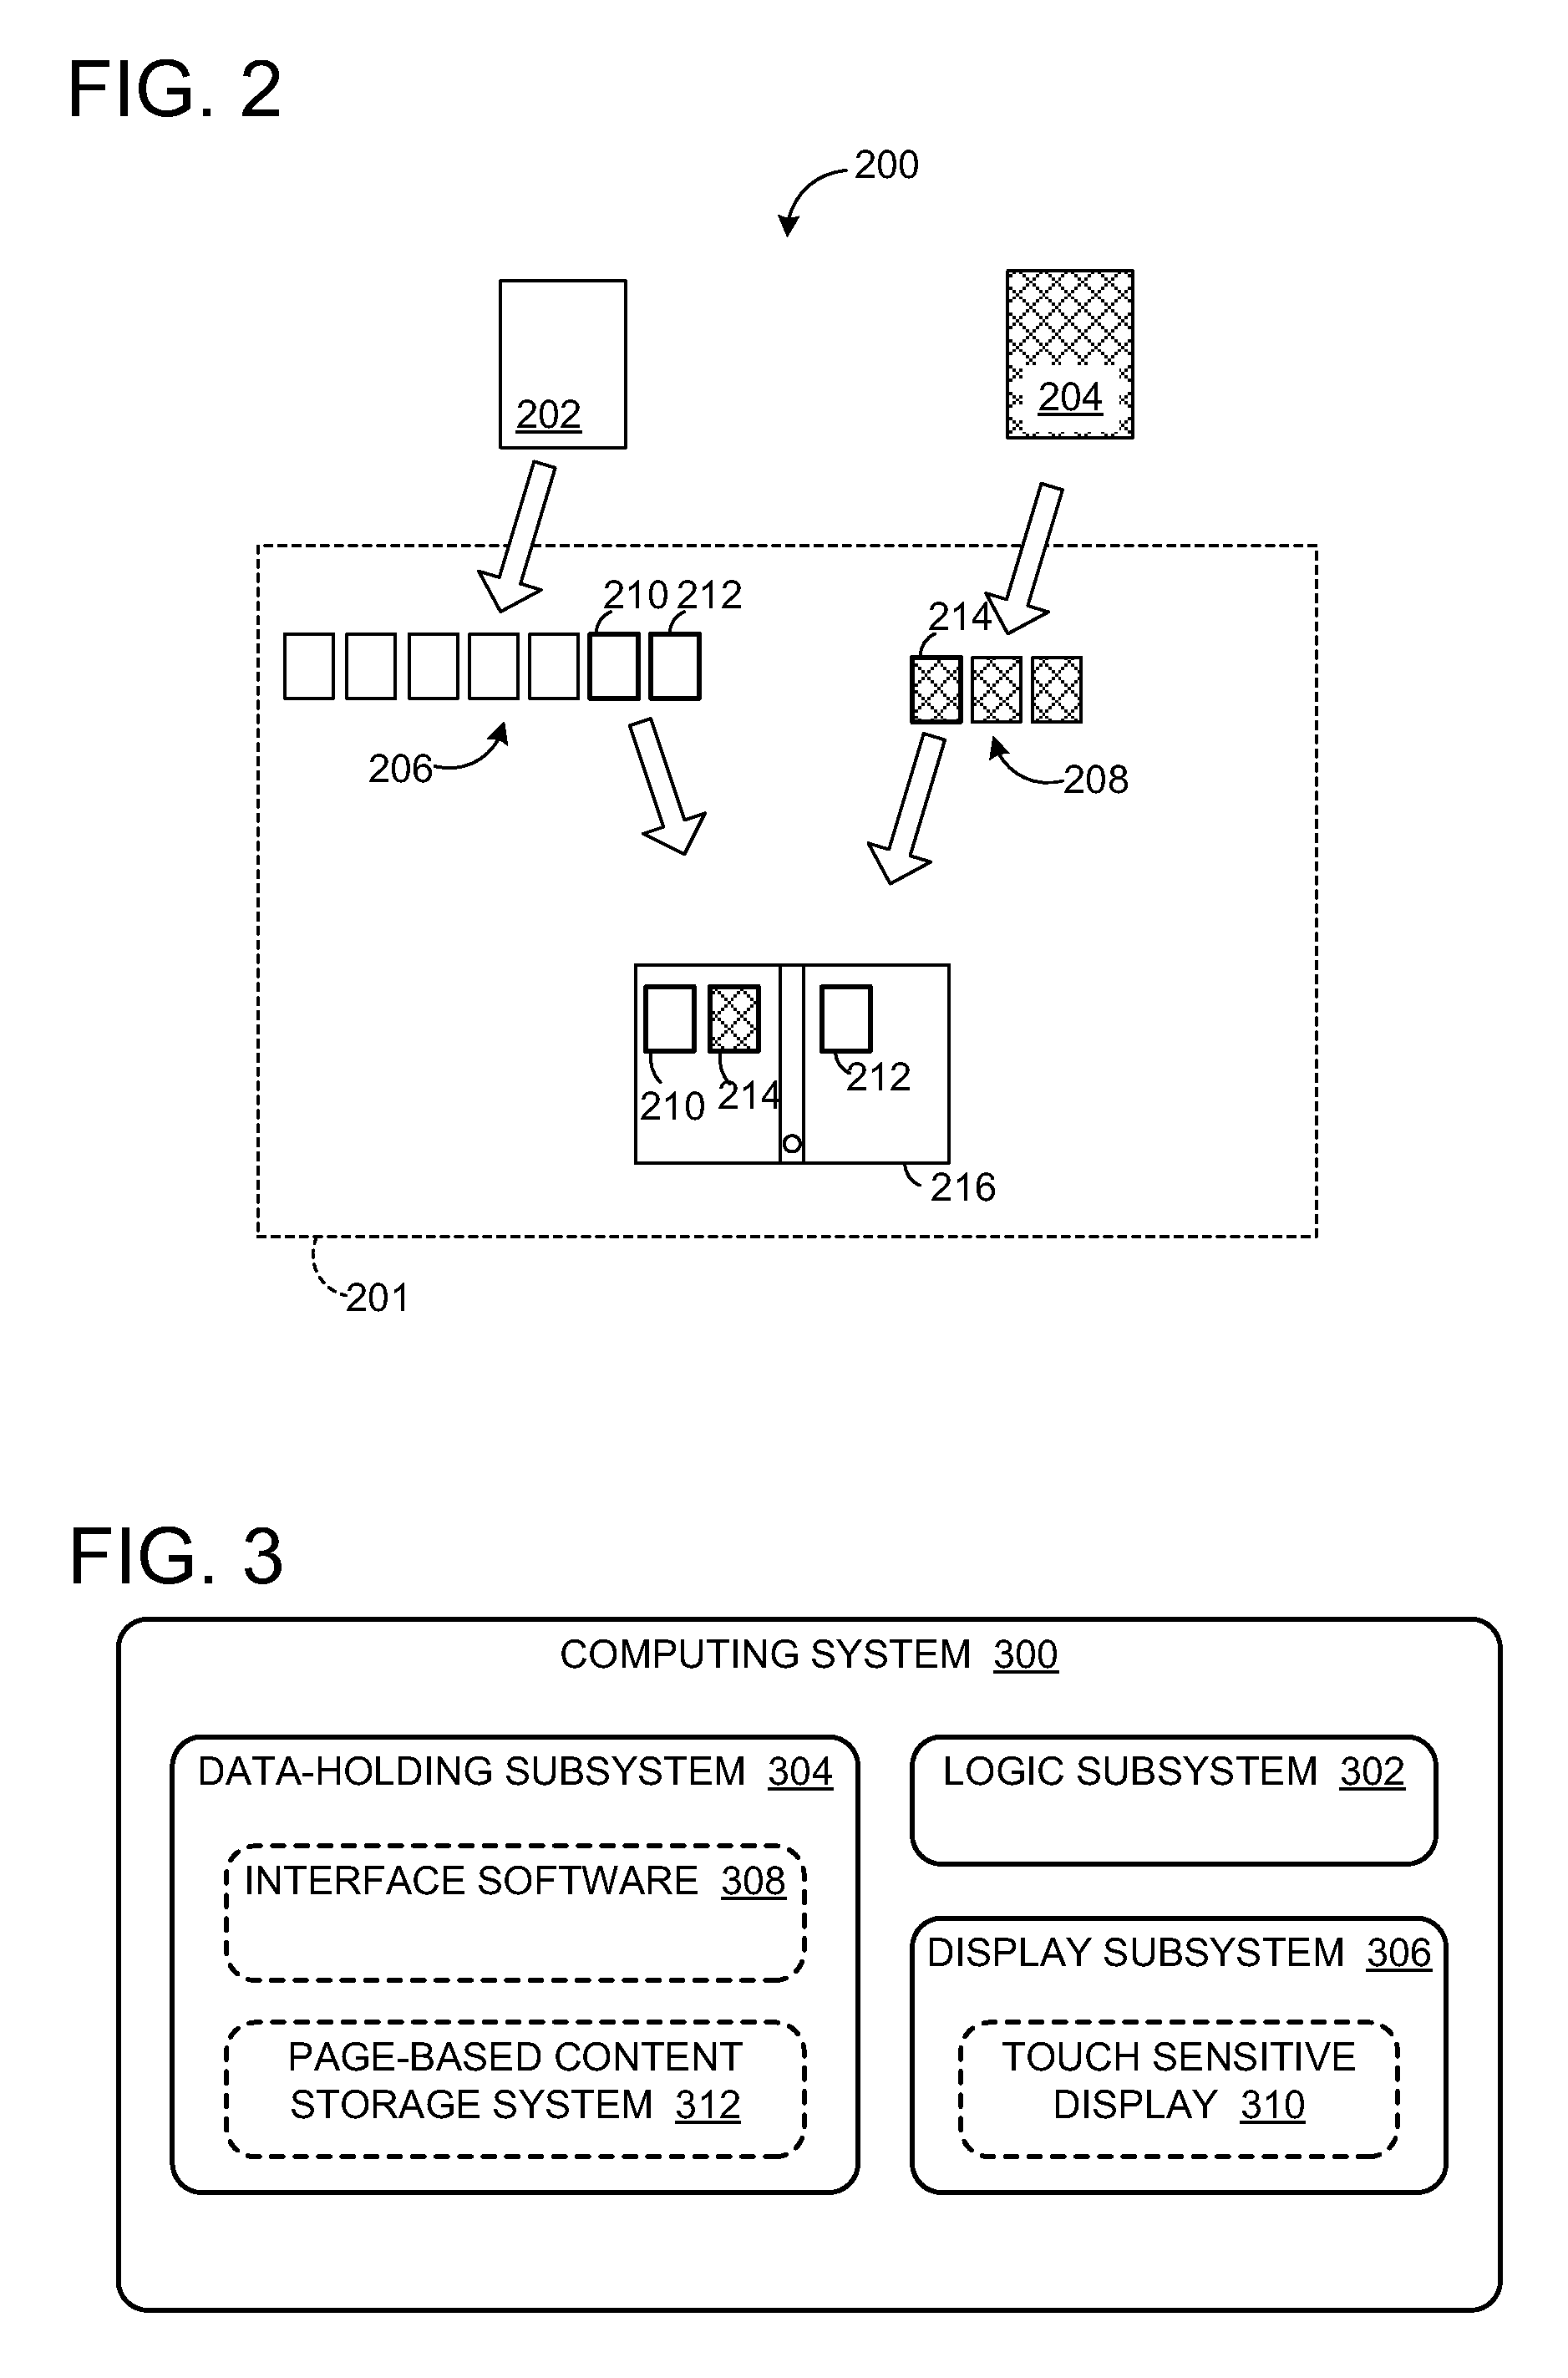 Page-based content storage system